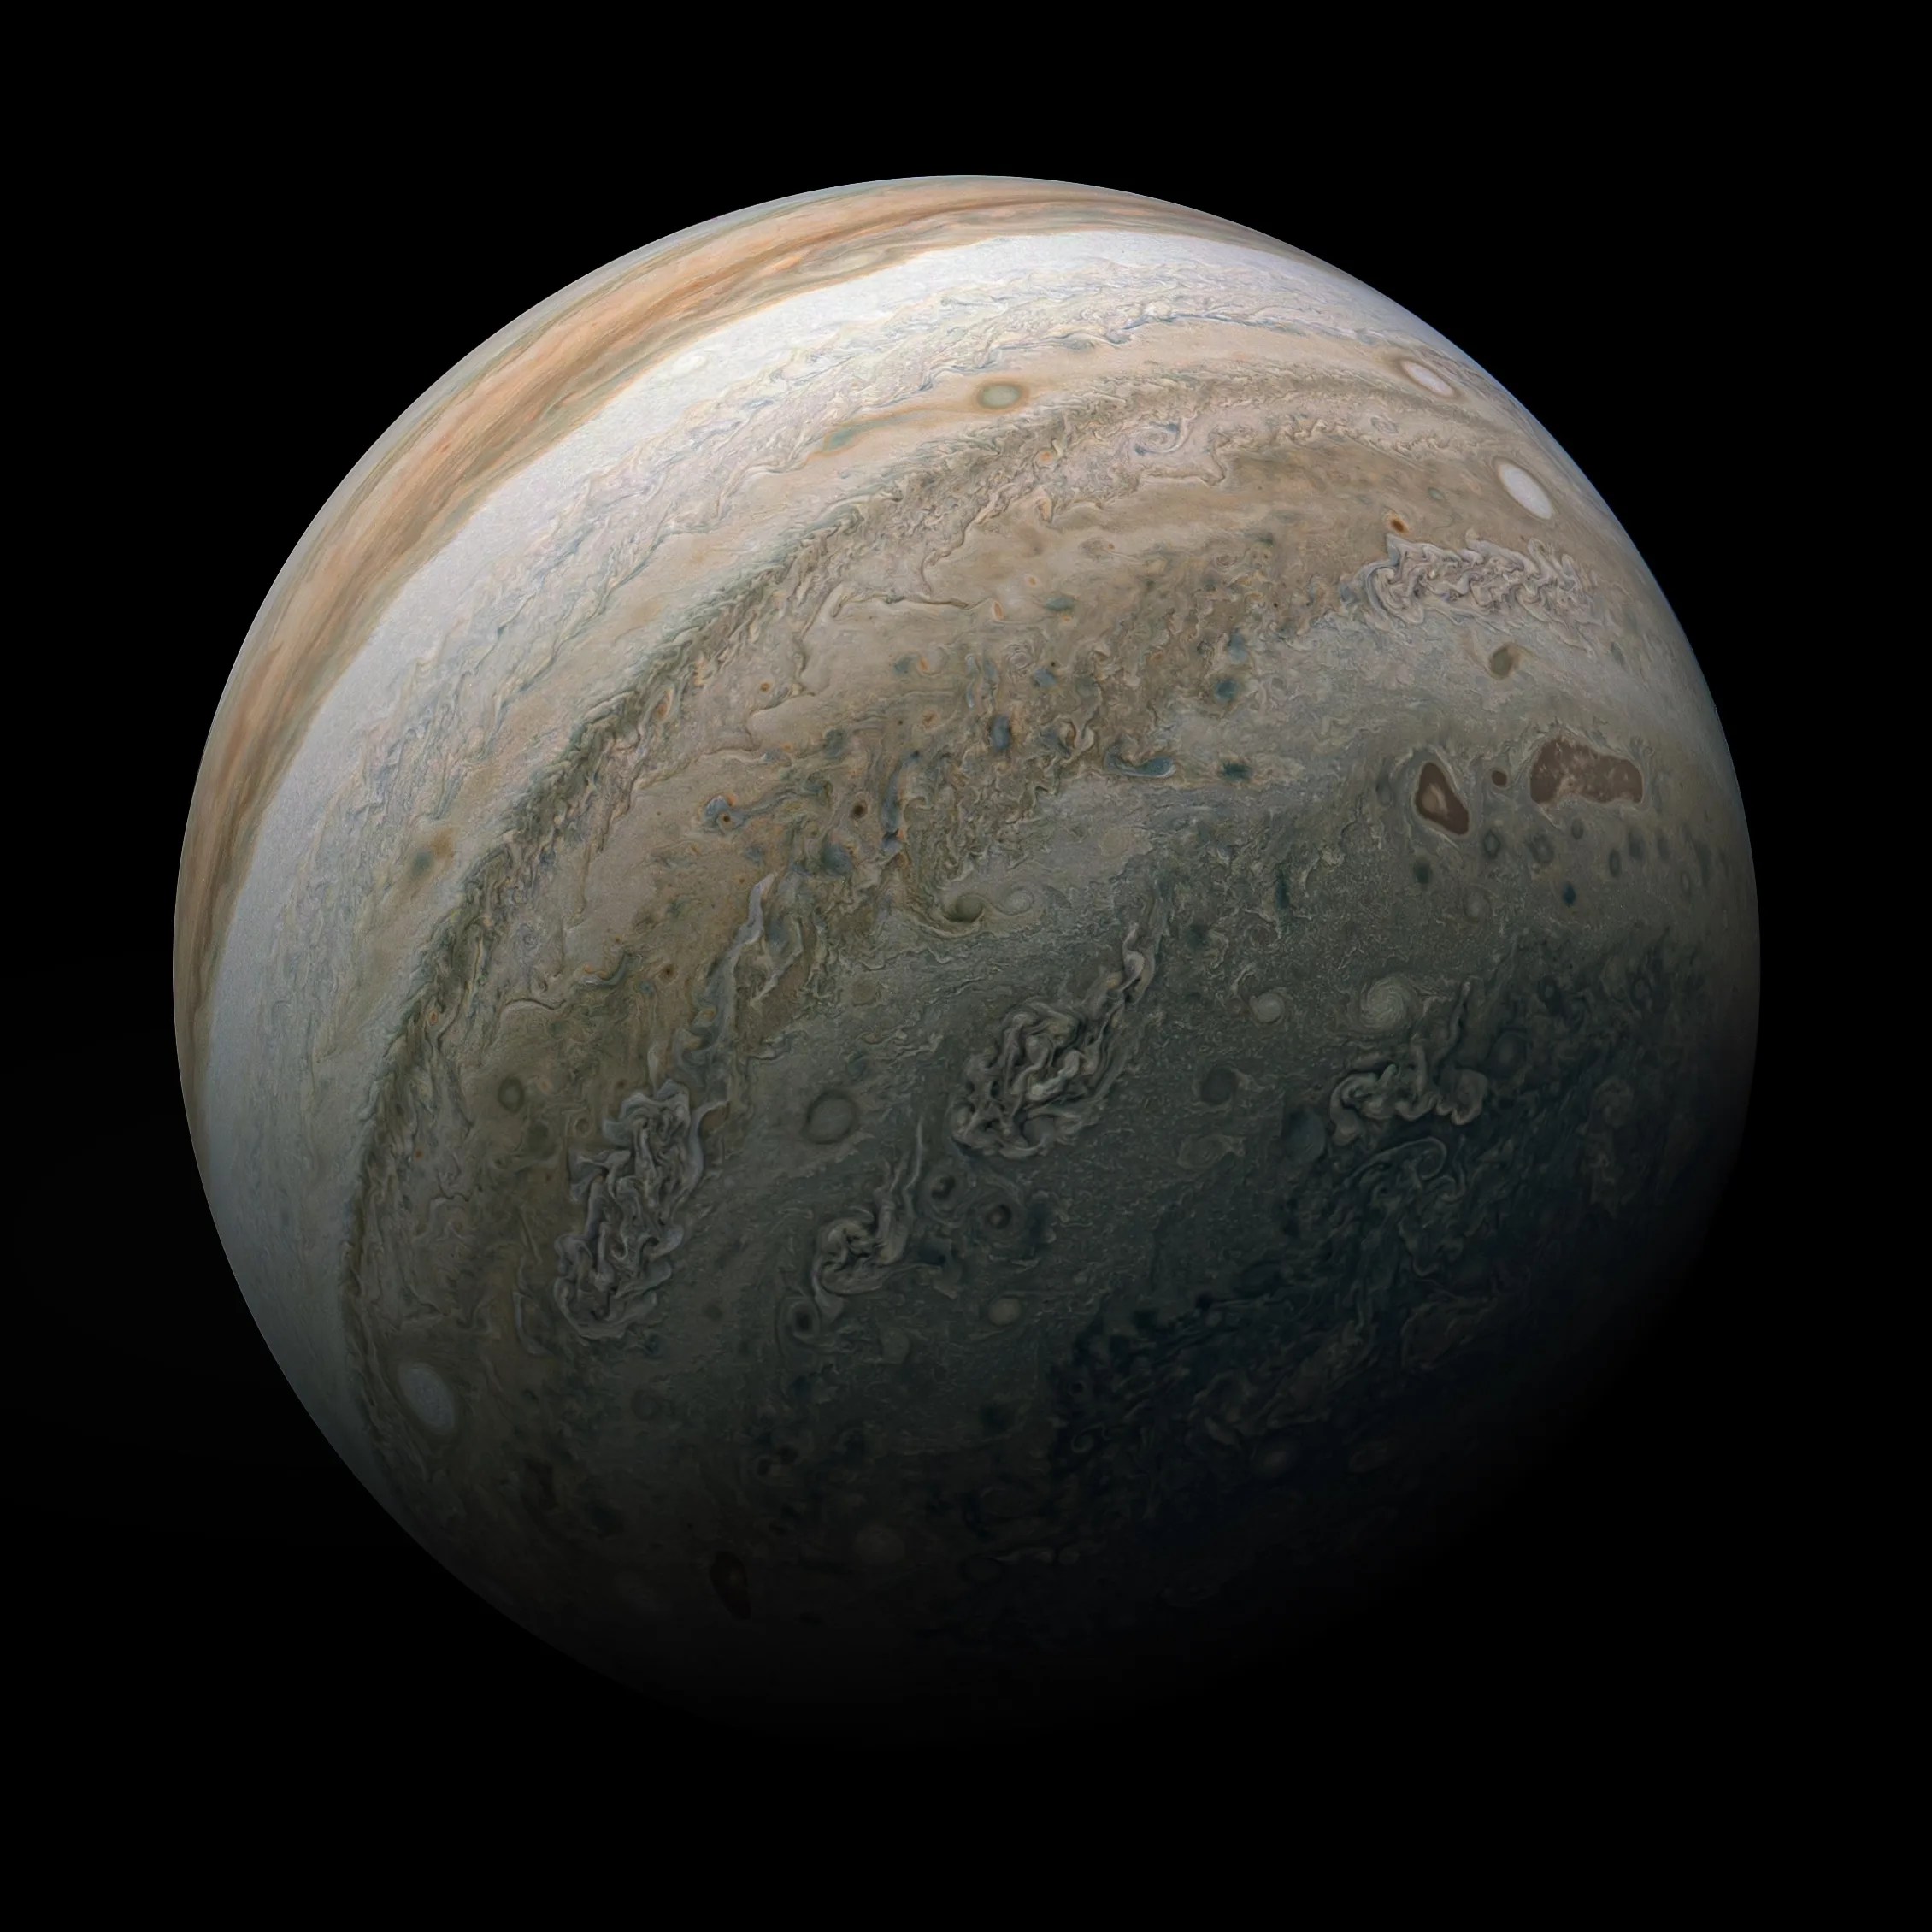 research paper about jupiter